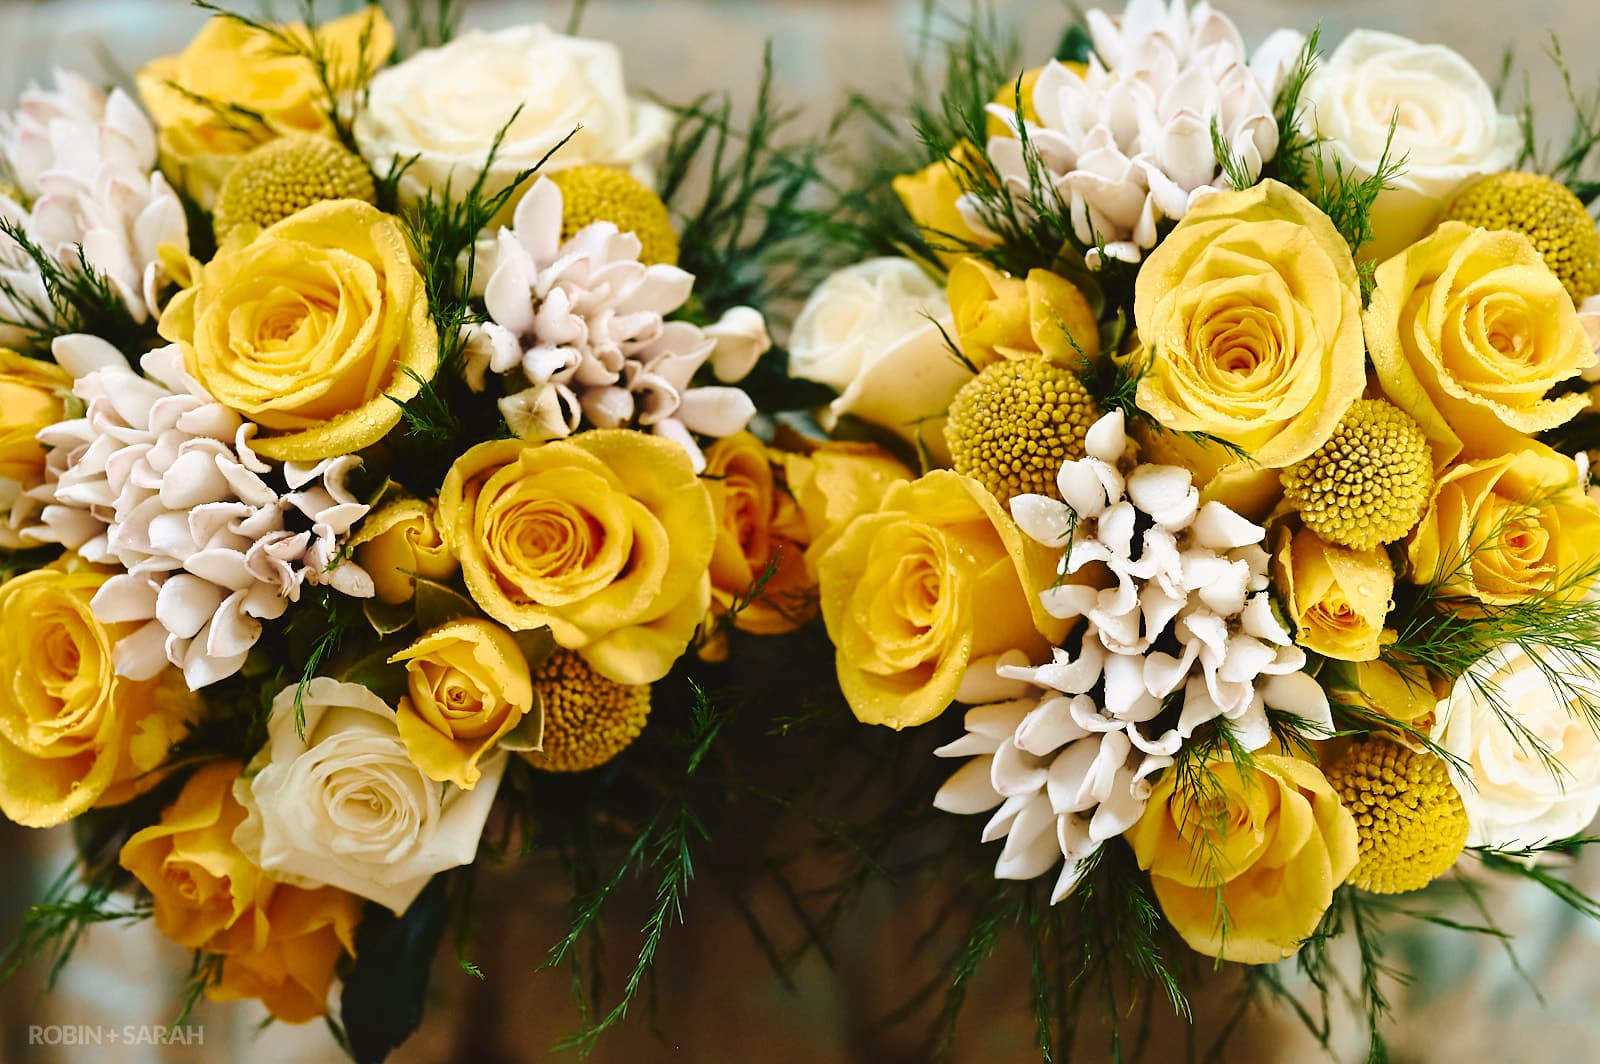 Detail of bridesmaids bouquets, with white and yellow flowers